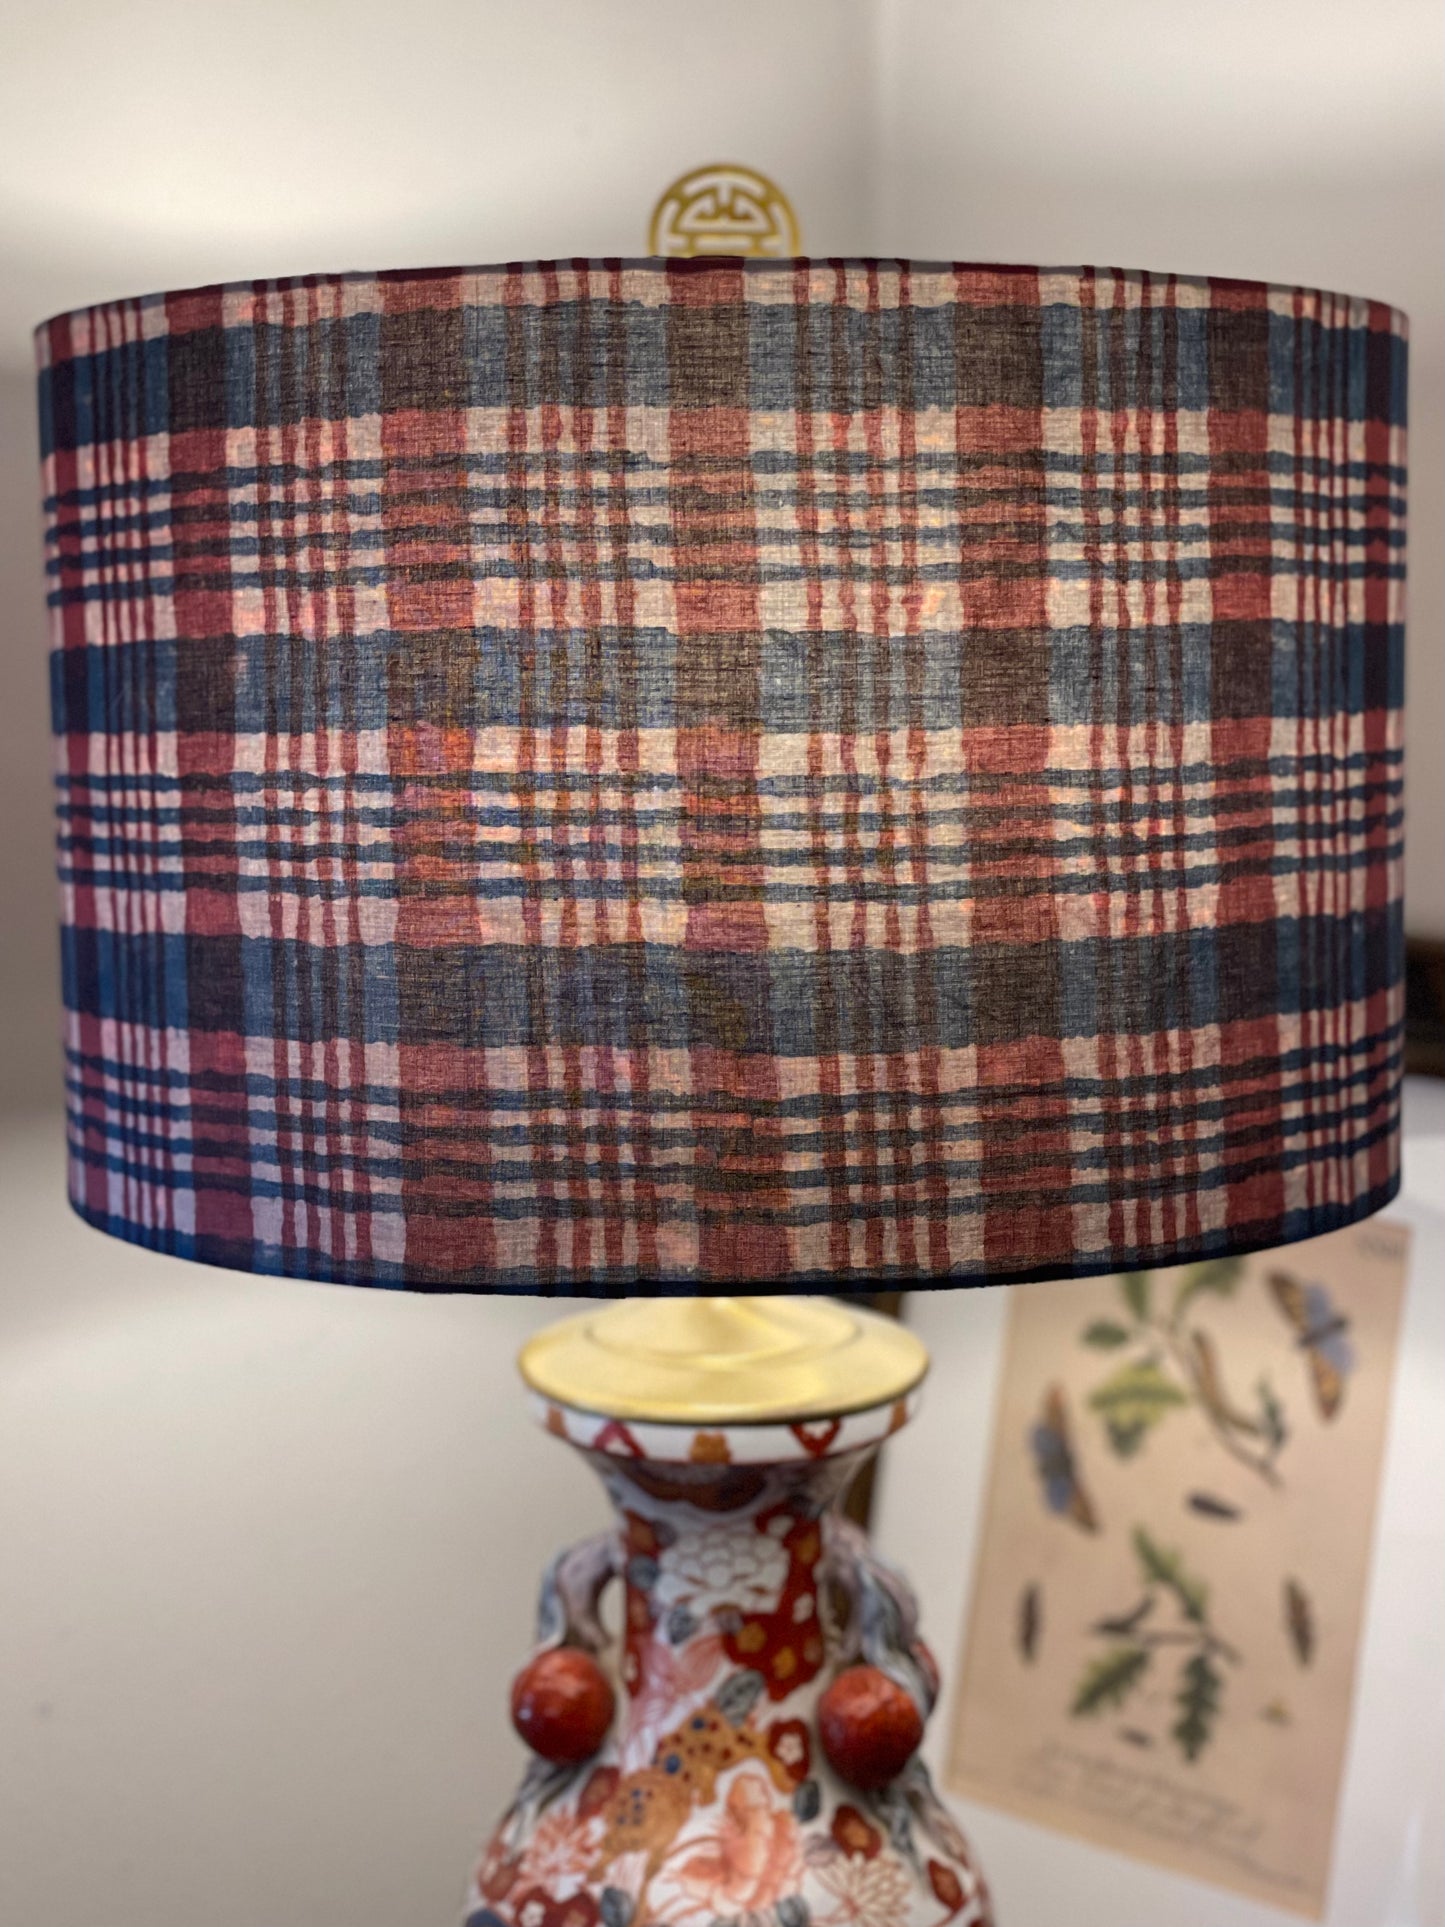 16 Inch Drum Lampshade. Indigo Hand Batik from India. Indigo, Faded Red, and Pale Taupe Plaid.